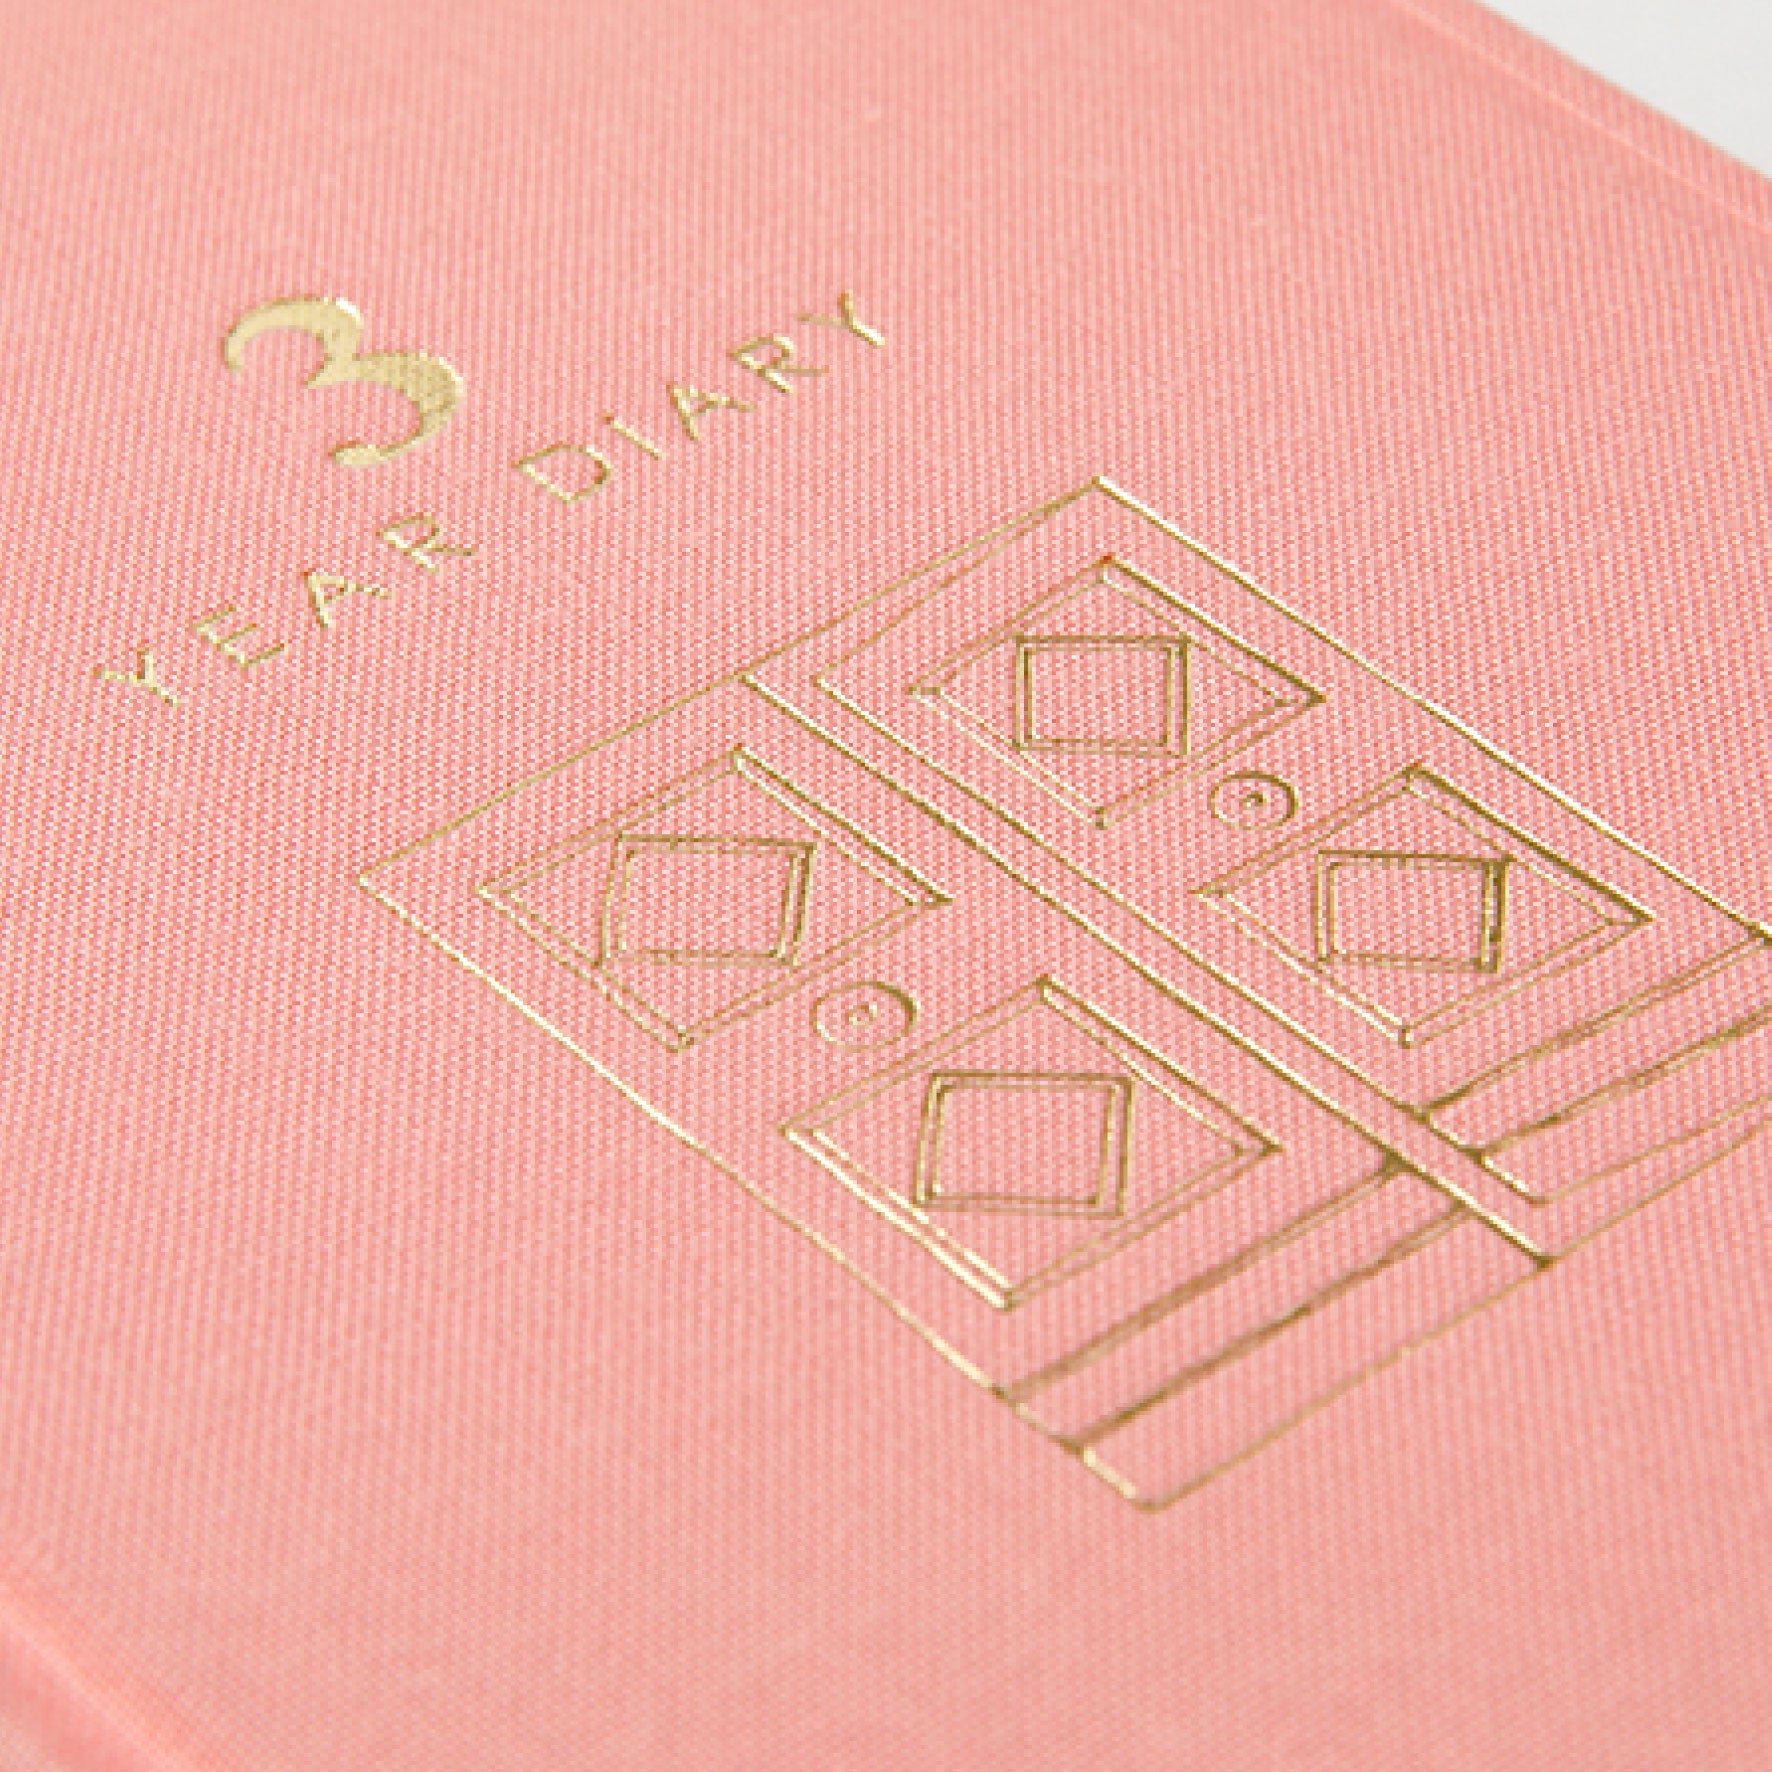 Midori - Daily Journal - Mini - 3 Years - Pink <Outgoing>